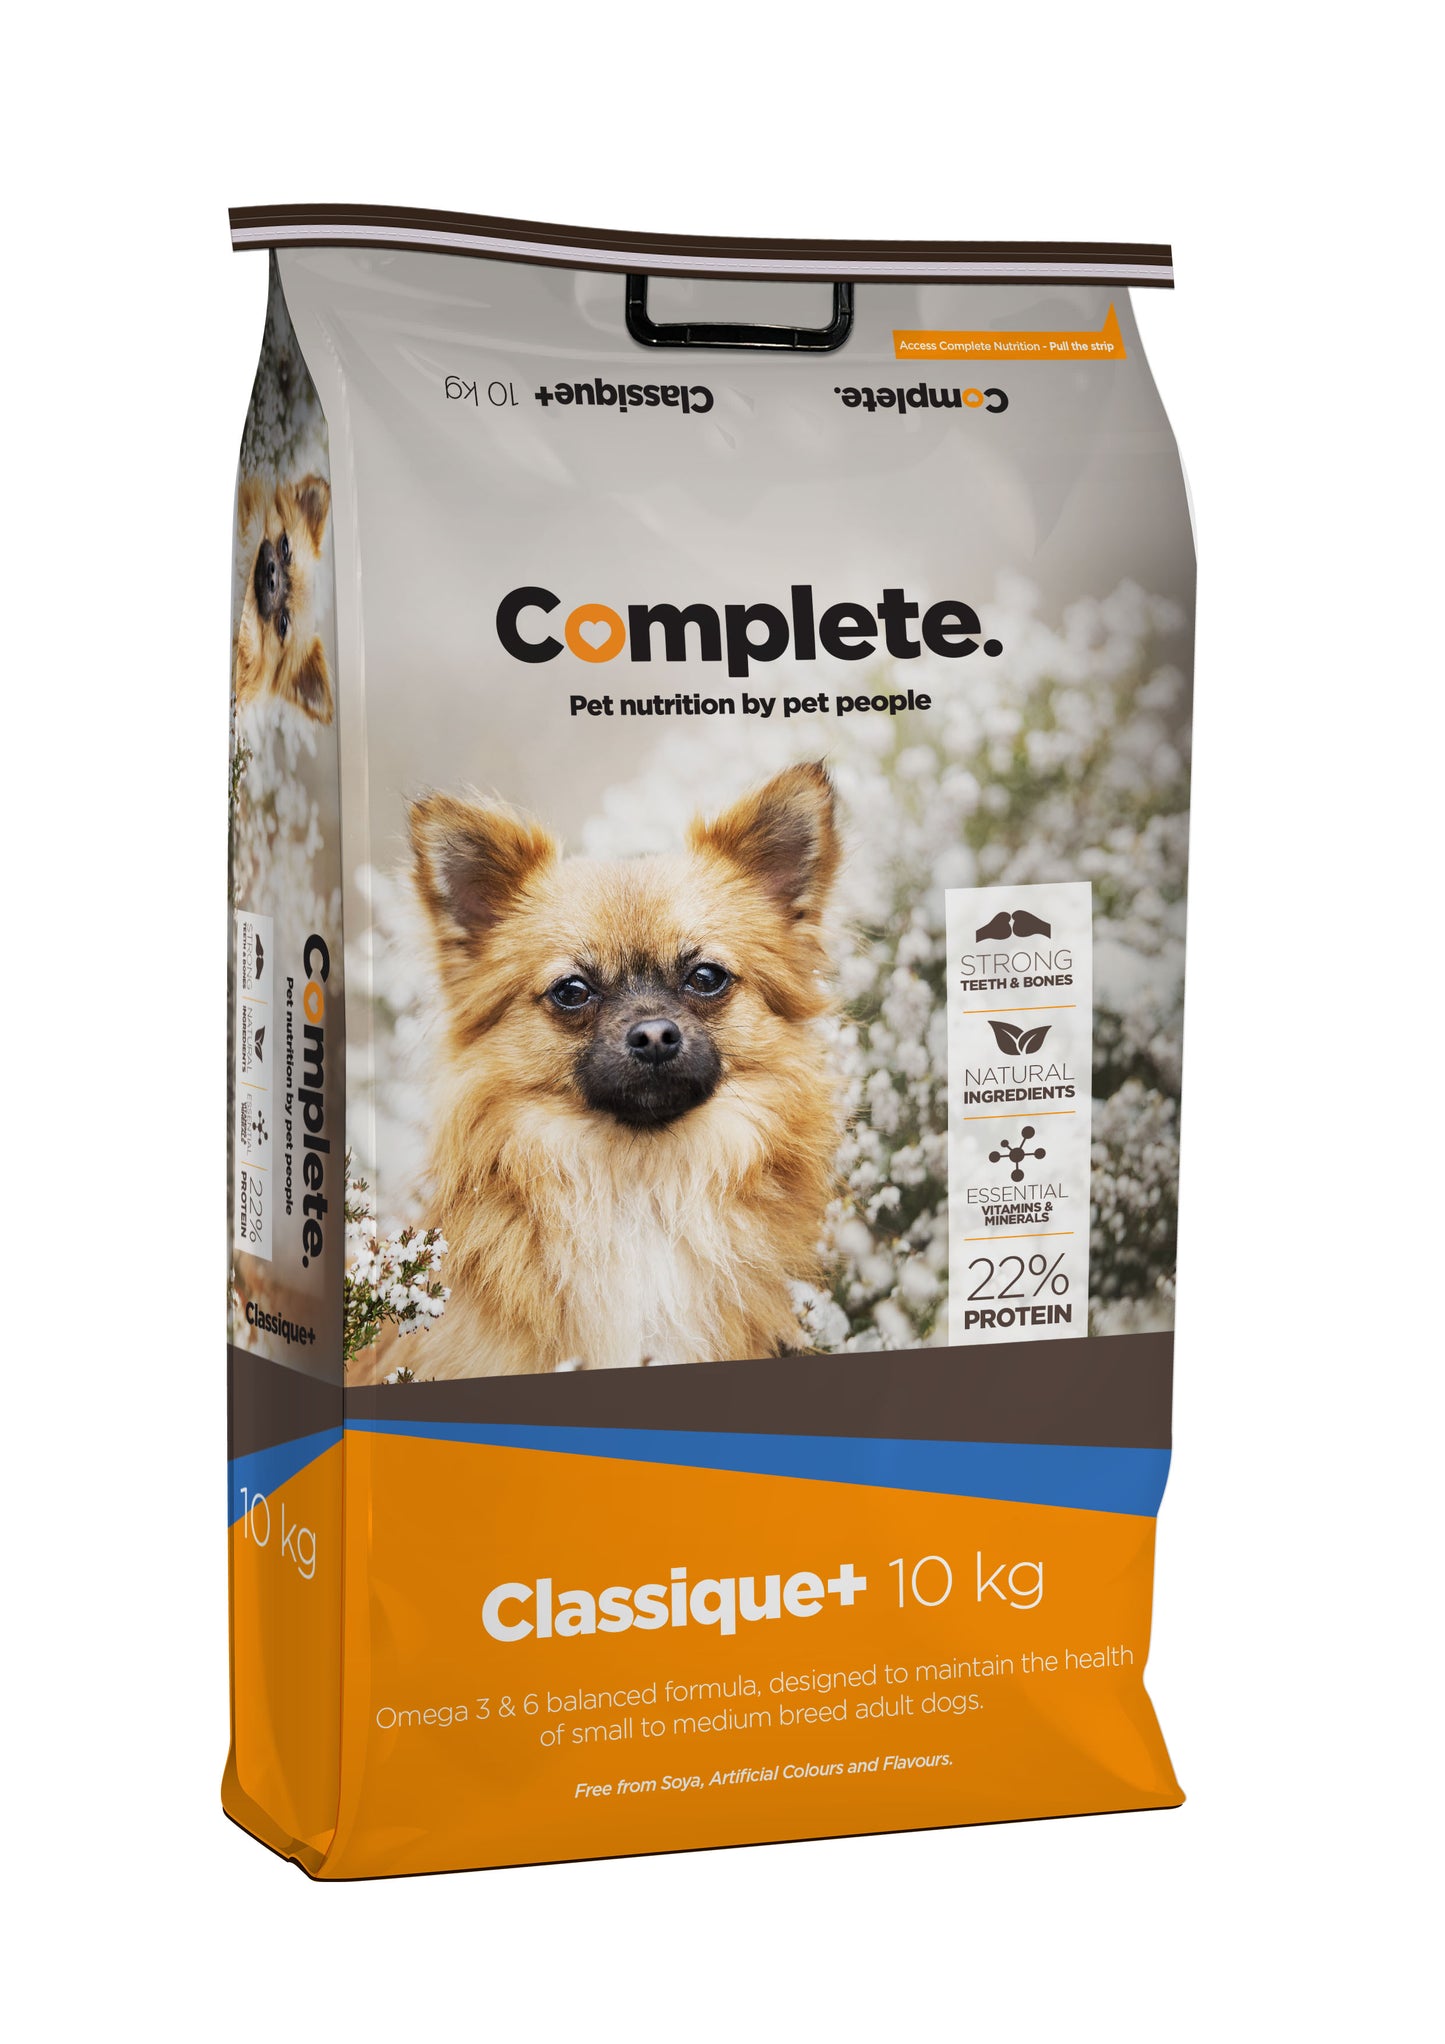 Classique+ 10kg Complete Pet Food For Small to Medium breed adult dogs from Pets Planet - South Africa’s Best Online Pet Store for premium pet products, best pet store near me, Dog food, pet food, dog wet food, dog bed, dog beds, washable dog bed, takealot dog bed, Complete Pet Nutrition, Complete pet nutrition dog food, hills dog food, optimizor dog food, royal canin dog food, jock dog food, bobtail dog food, canine cuisine, acana dog food, best dog food, dog food near me, best dog food brands